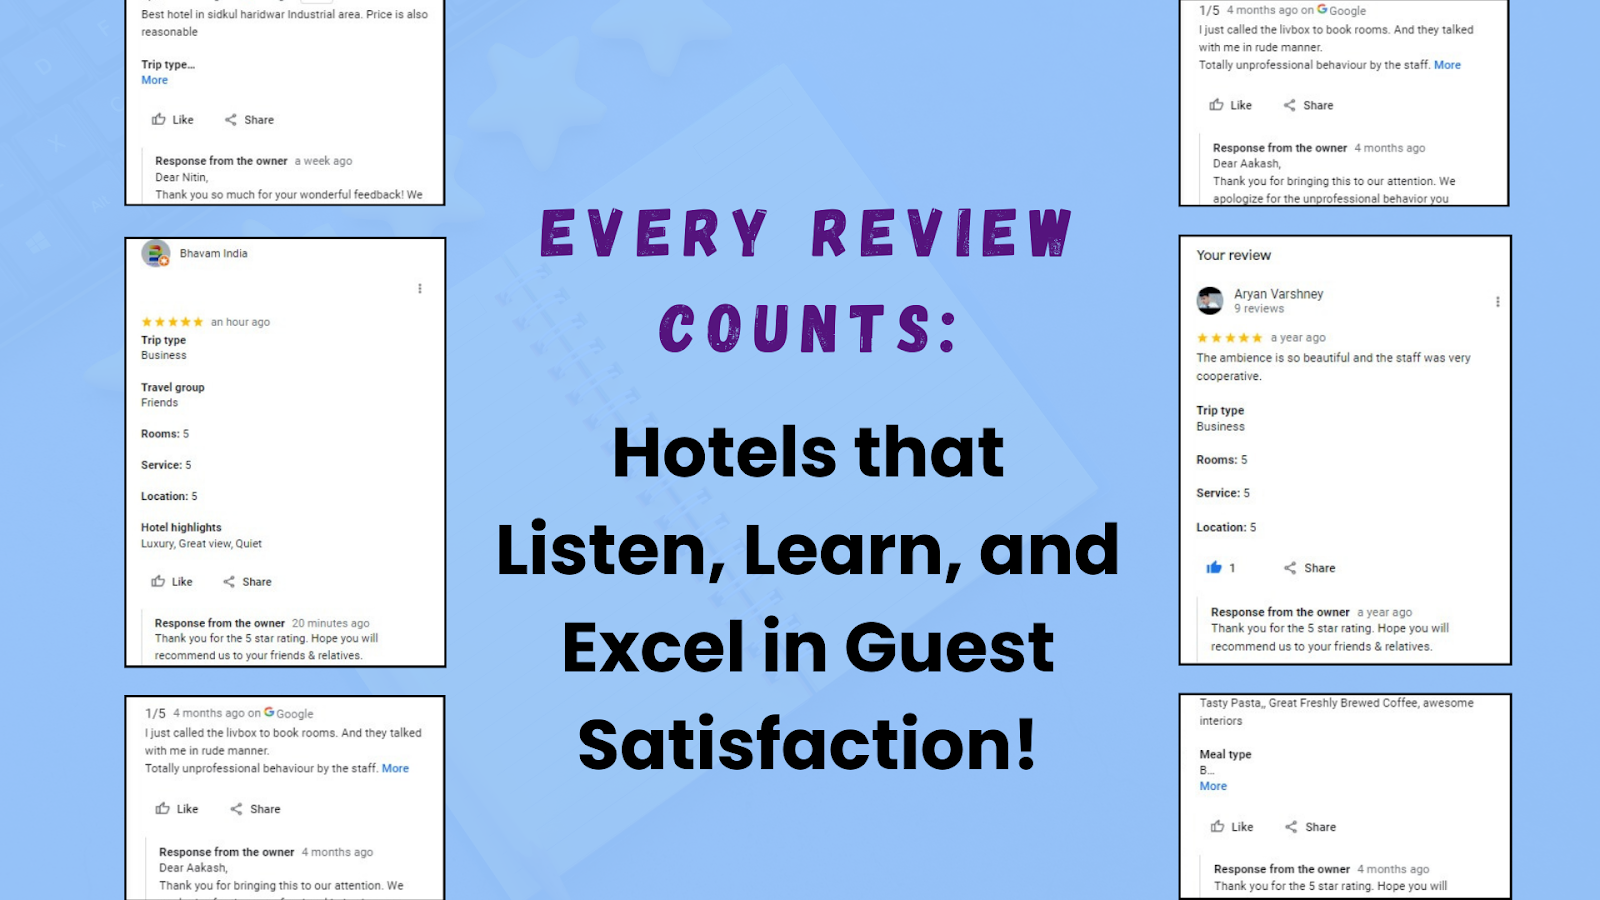 Optimised review reply samples for hotels across different star ratings